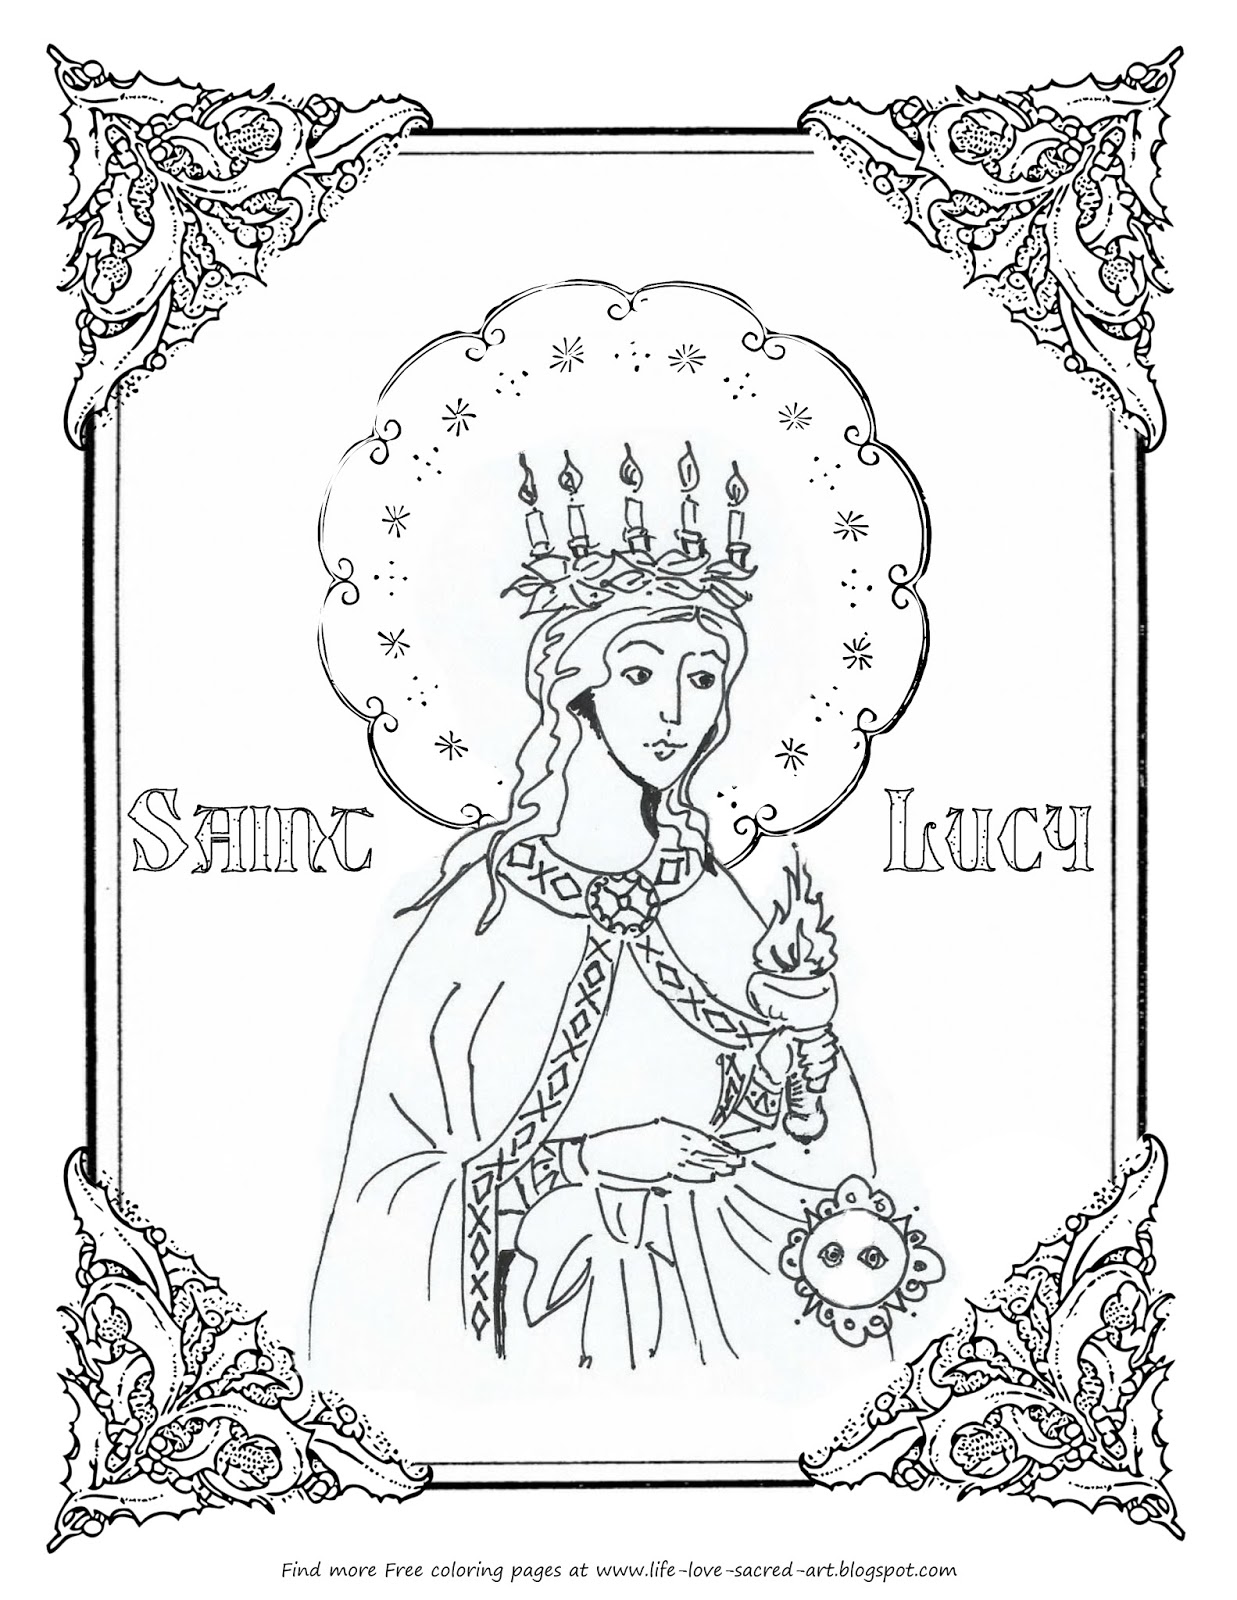 Life Love Sacred Art FREE St Lucy Coloring Page